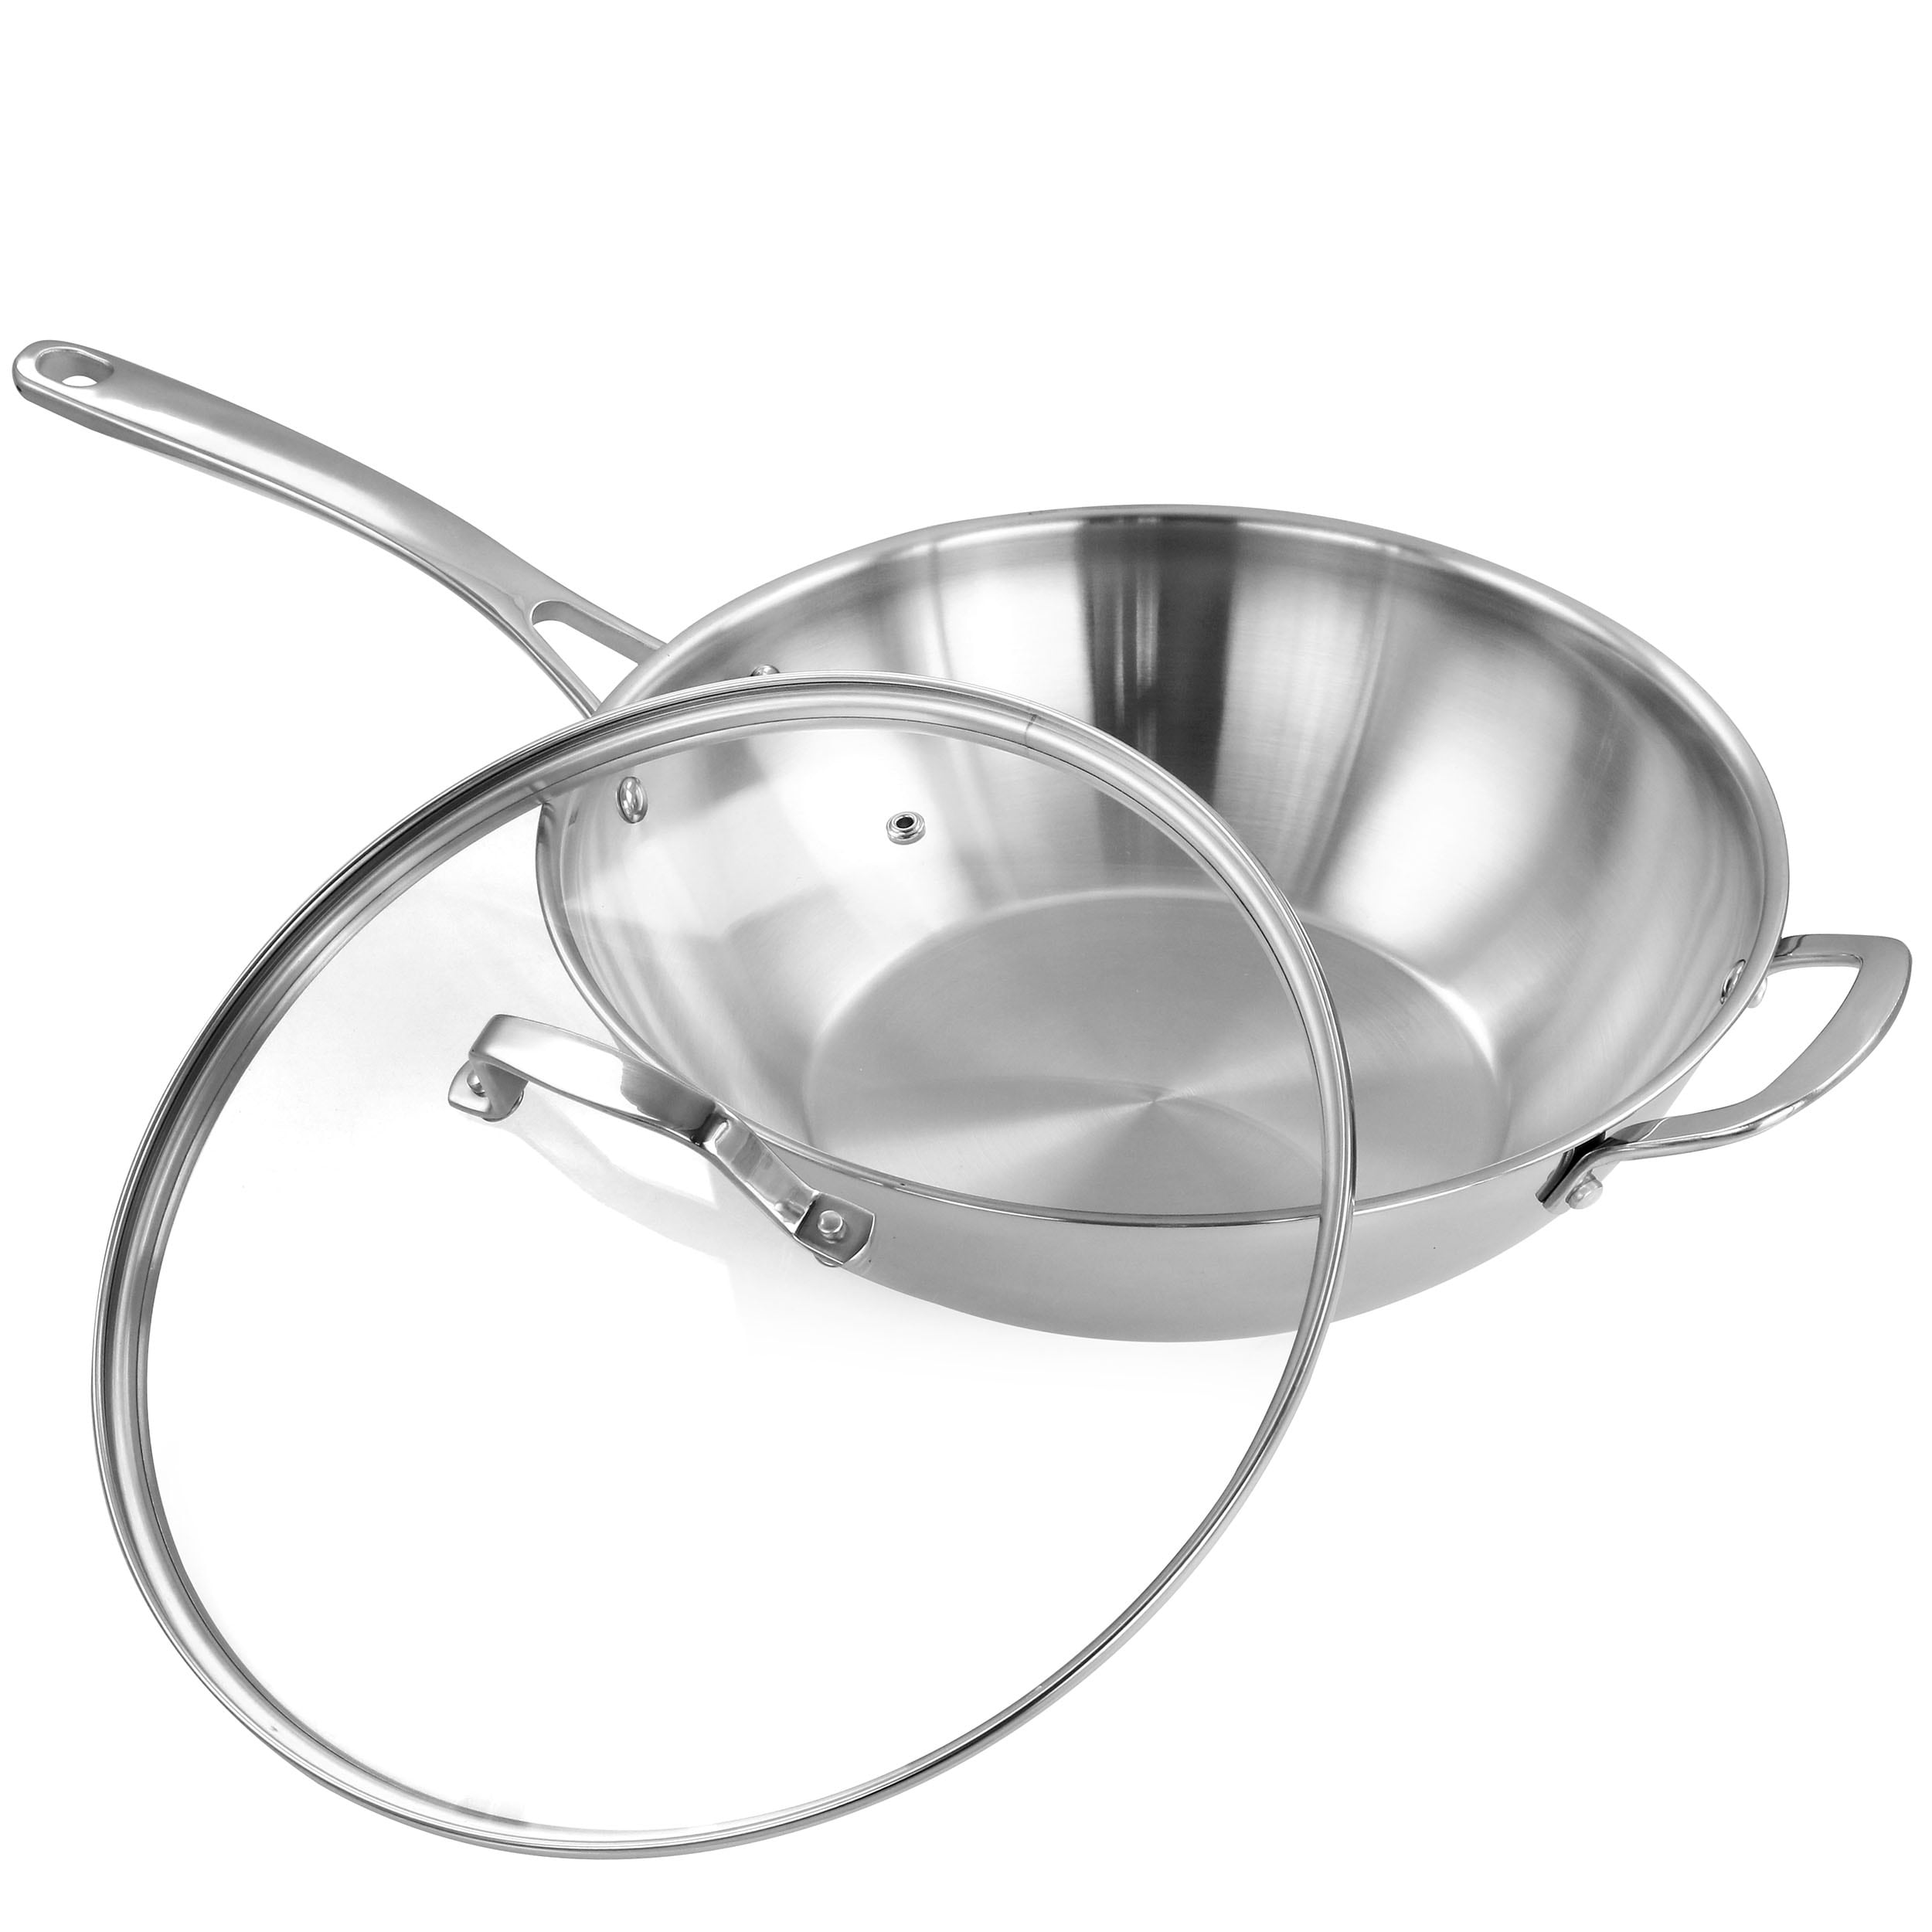 https://ak1.ostkcdn.com/images/products/is/images/direct/2e2a1453135f691b64bb749156d1ee4c45e5f3ec/Martha-Stewart-Stainless-Steel-Essential-12-Inch-Pan-with-Lid.jpg